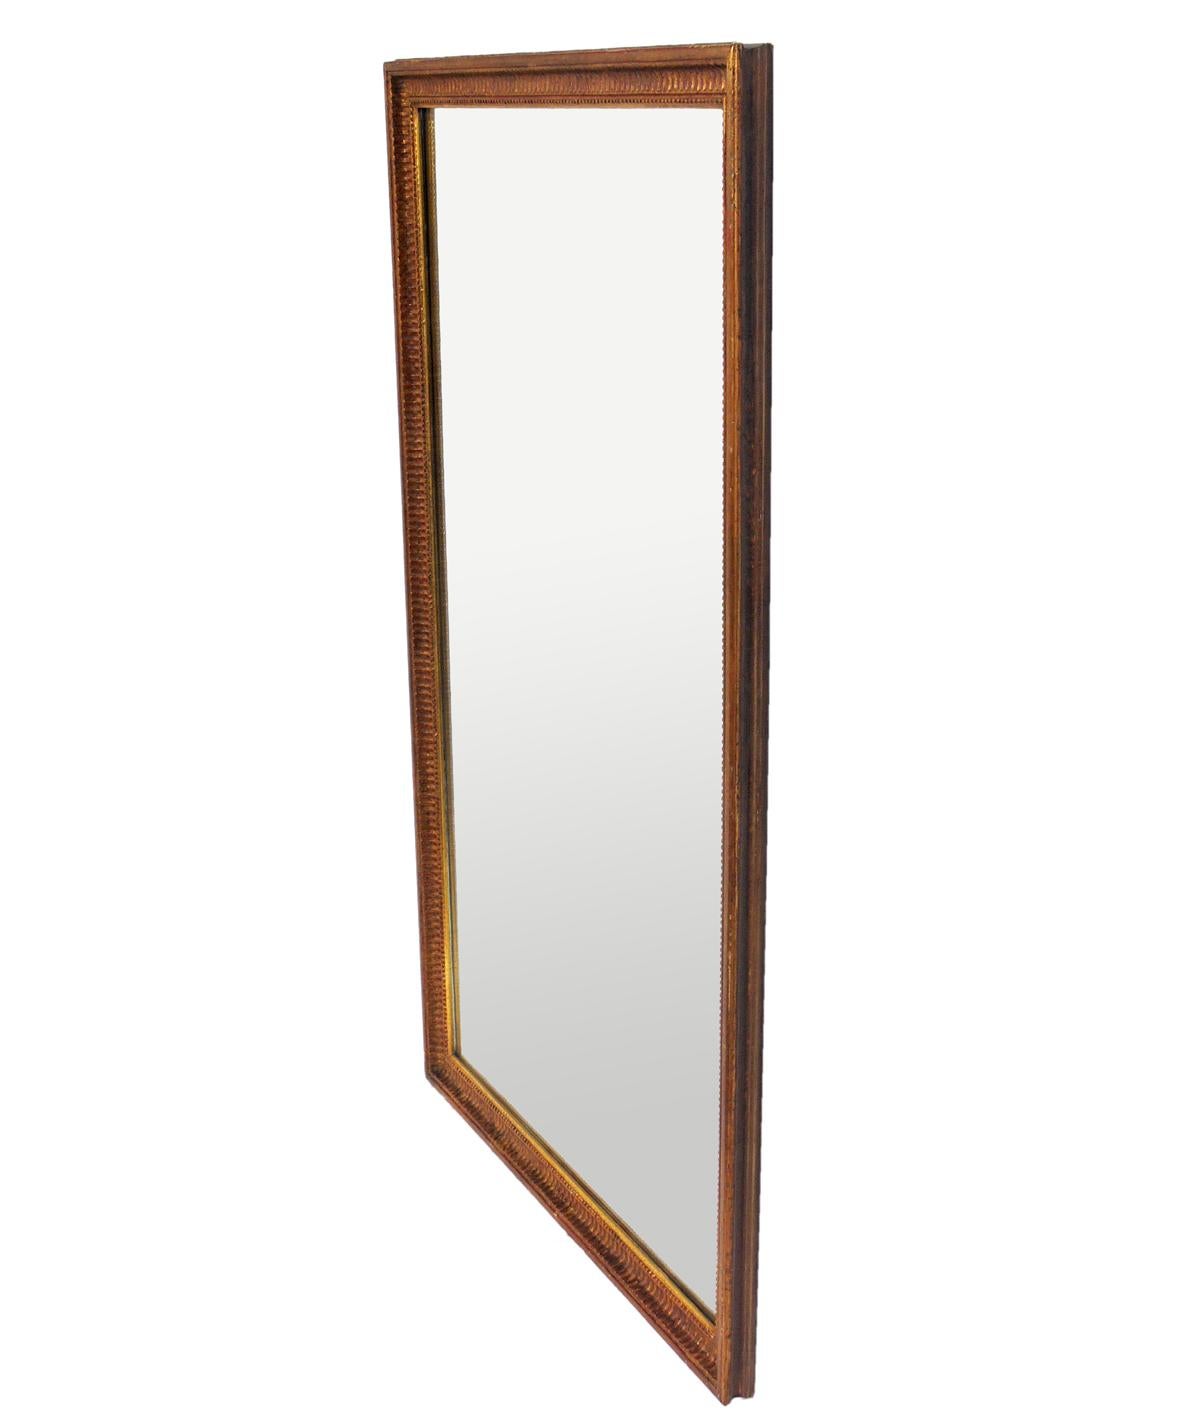 Gold Leaf Mirror, probably American, circa 1950s. Retains warm original patina to both the gilt frame and mirror that only come with age.